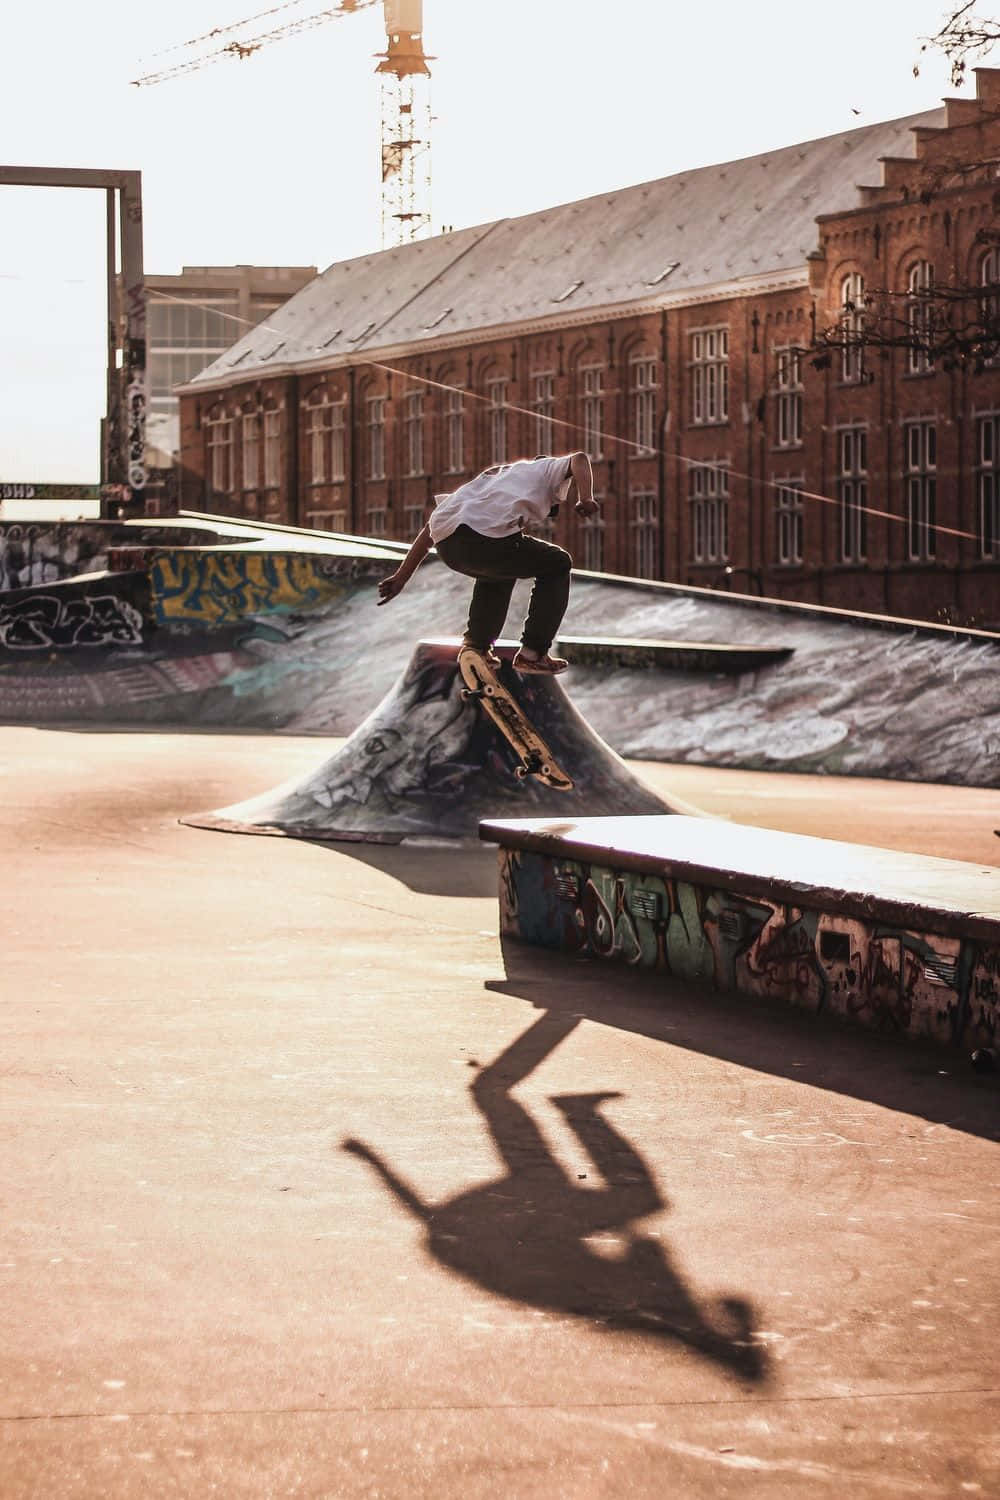 A Skateboarder Doing A Trick On A Ramp